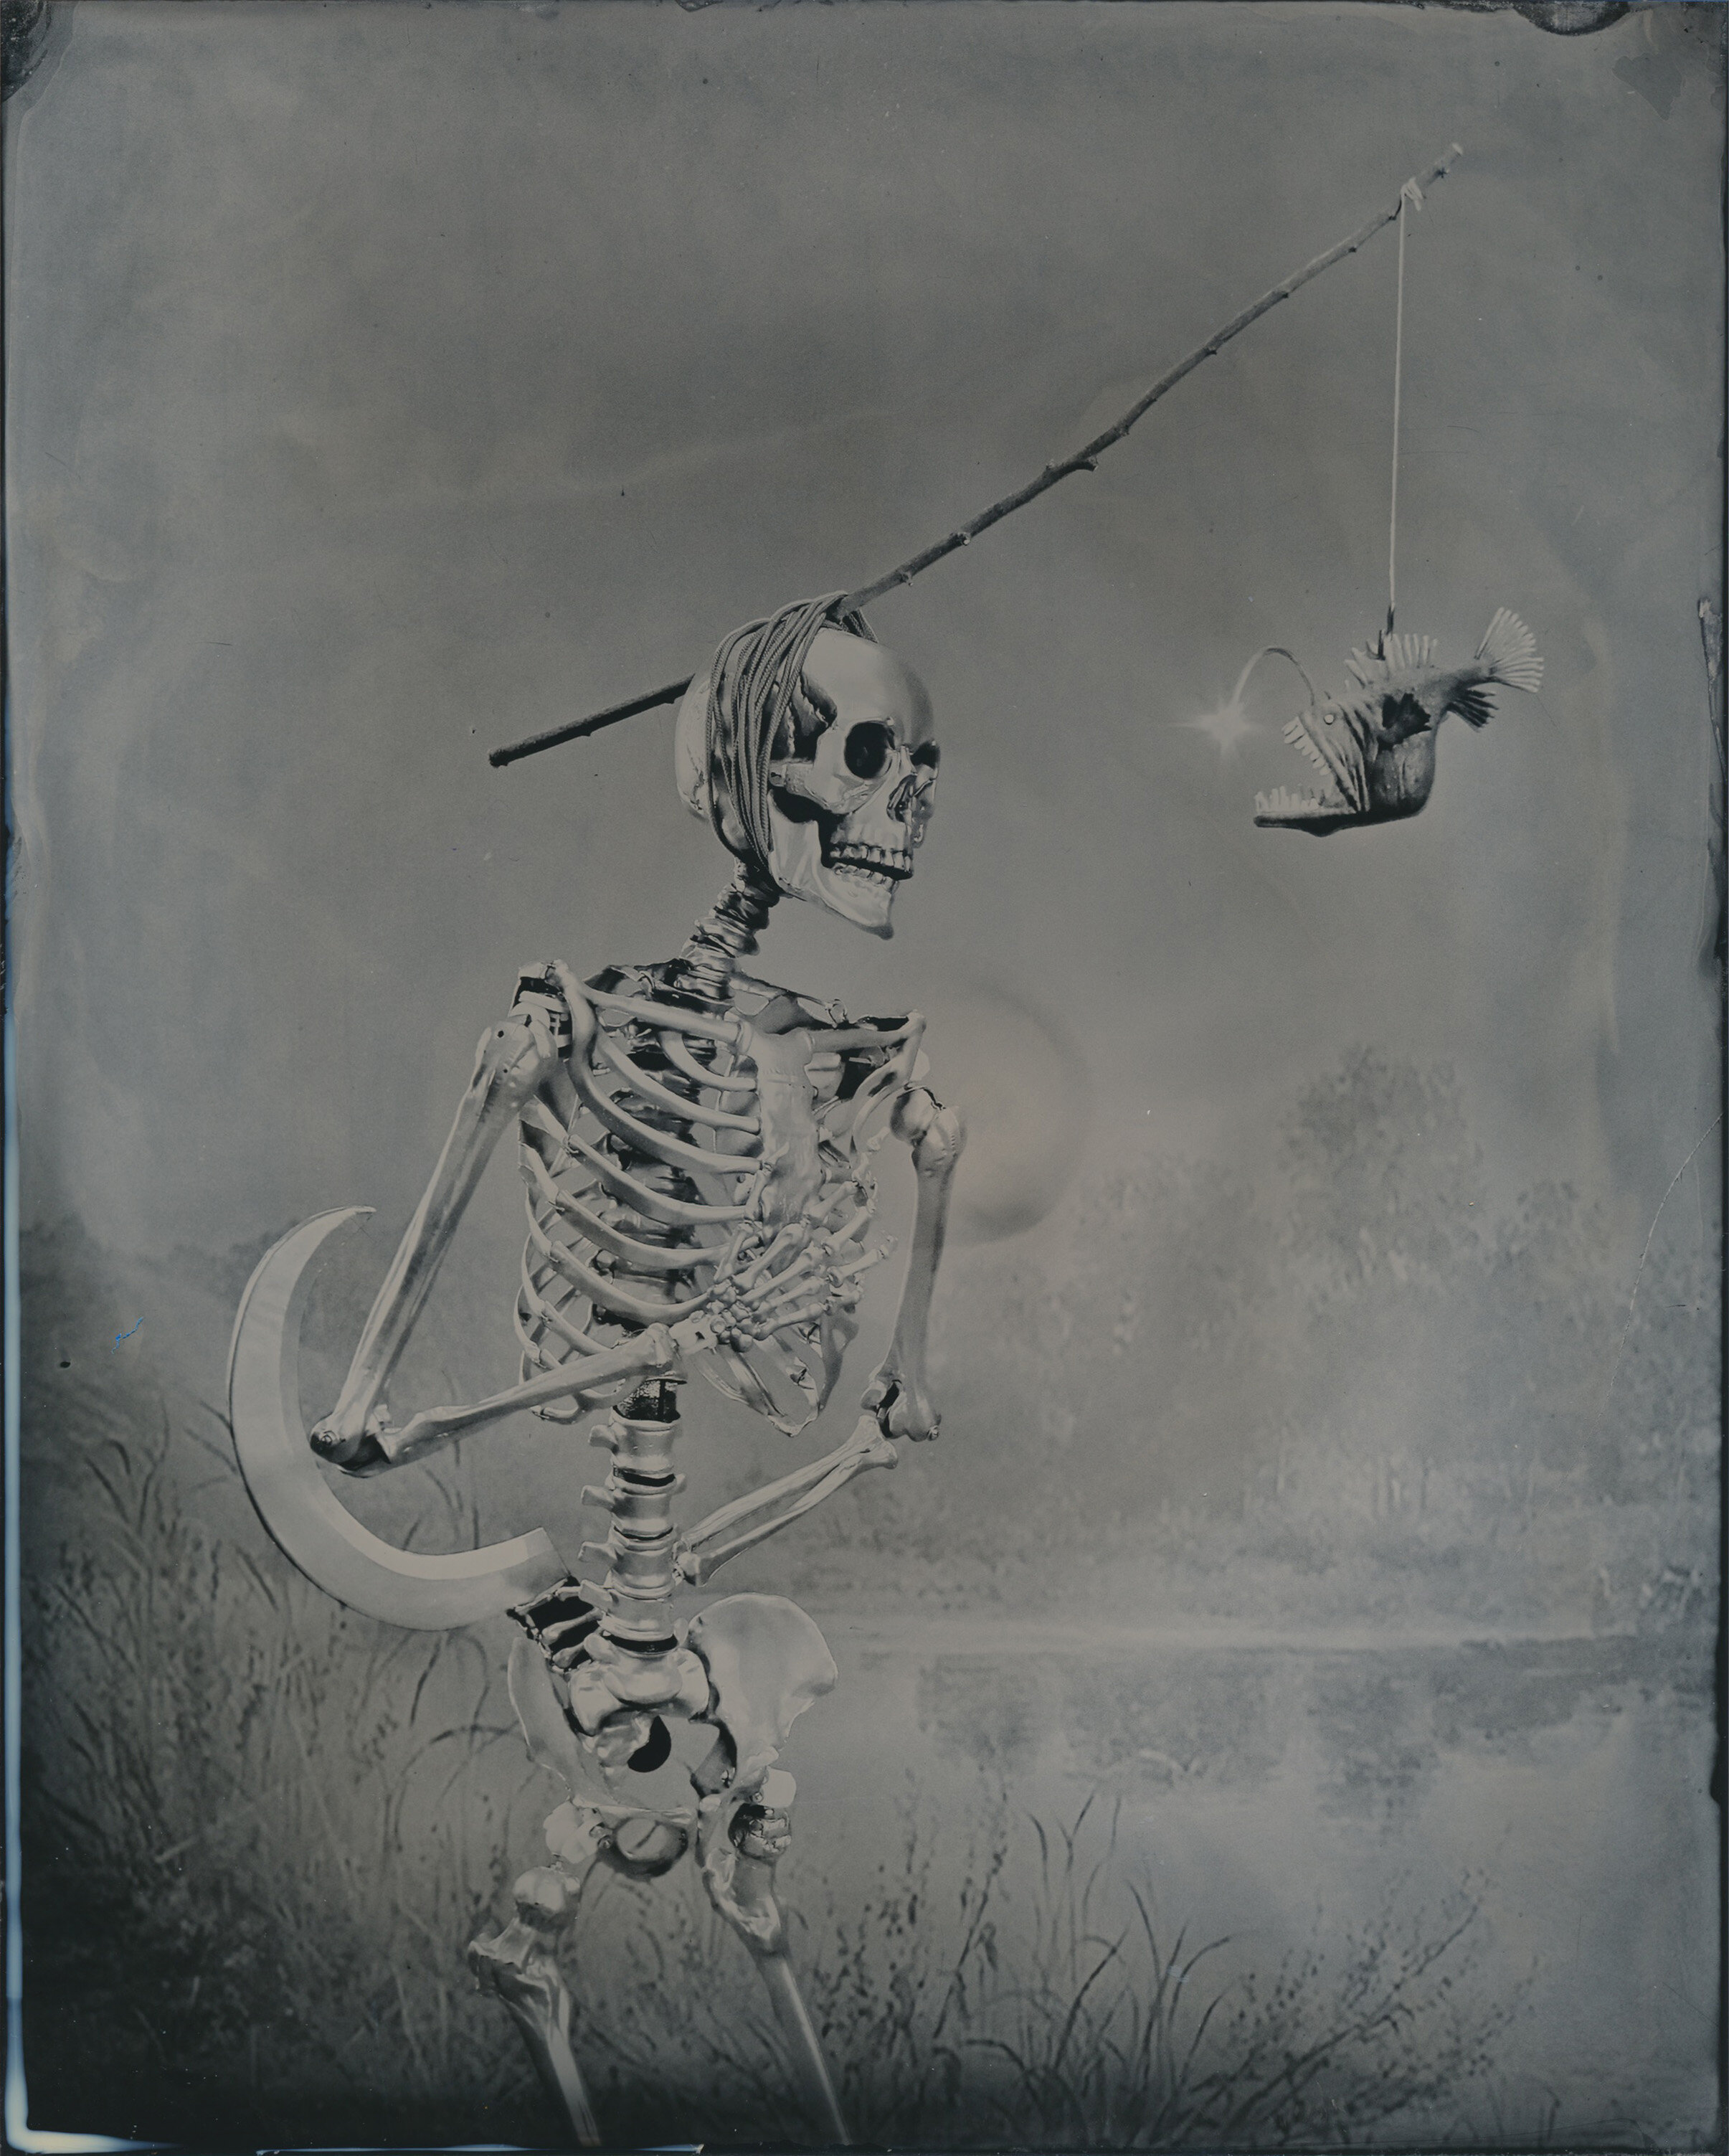   “A Provocation from Chronos”   2020  Wet Plate Collodion  8x10 